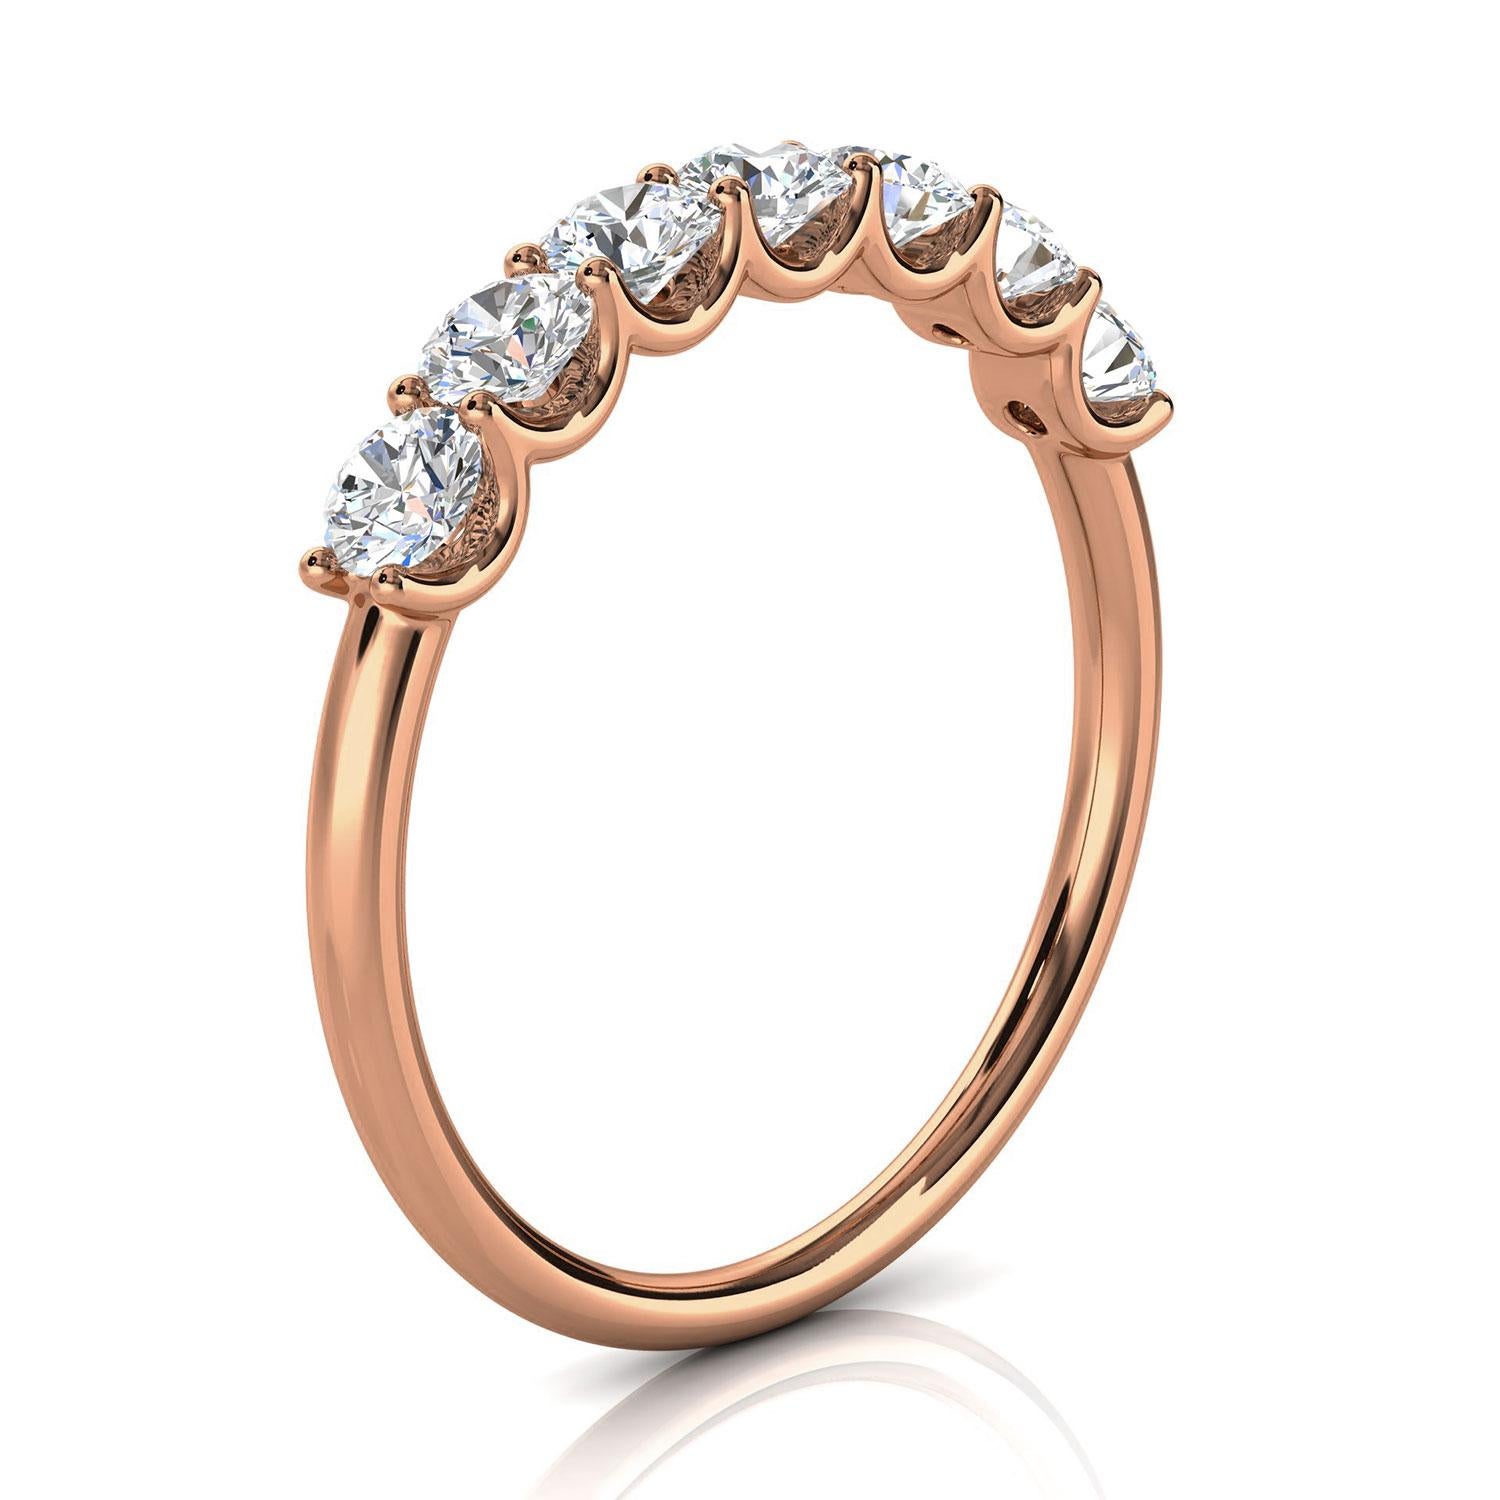 This Delicate ring features Seven (7) floating Brilliante round diamonds set in 